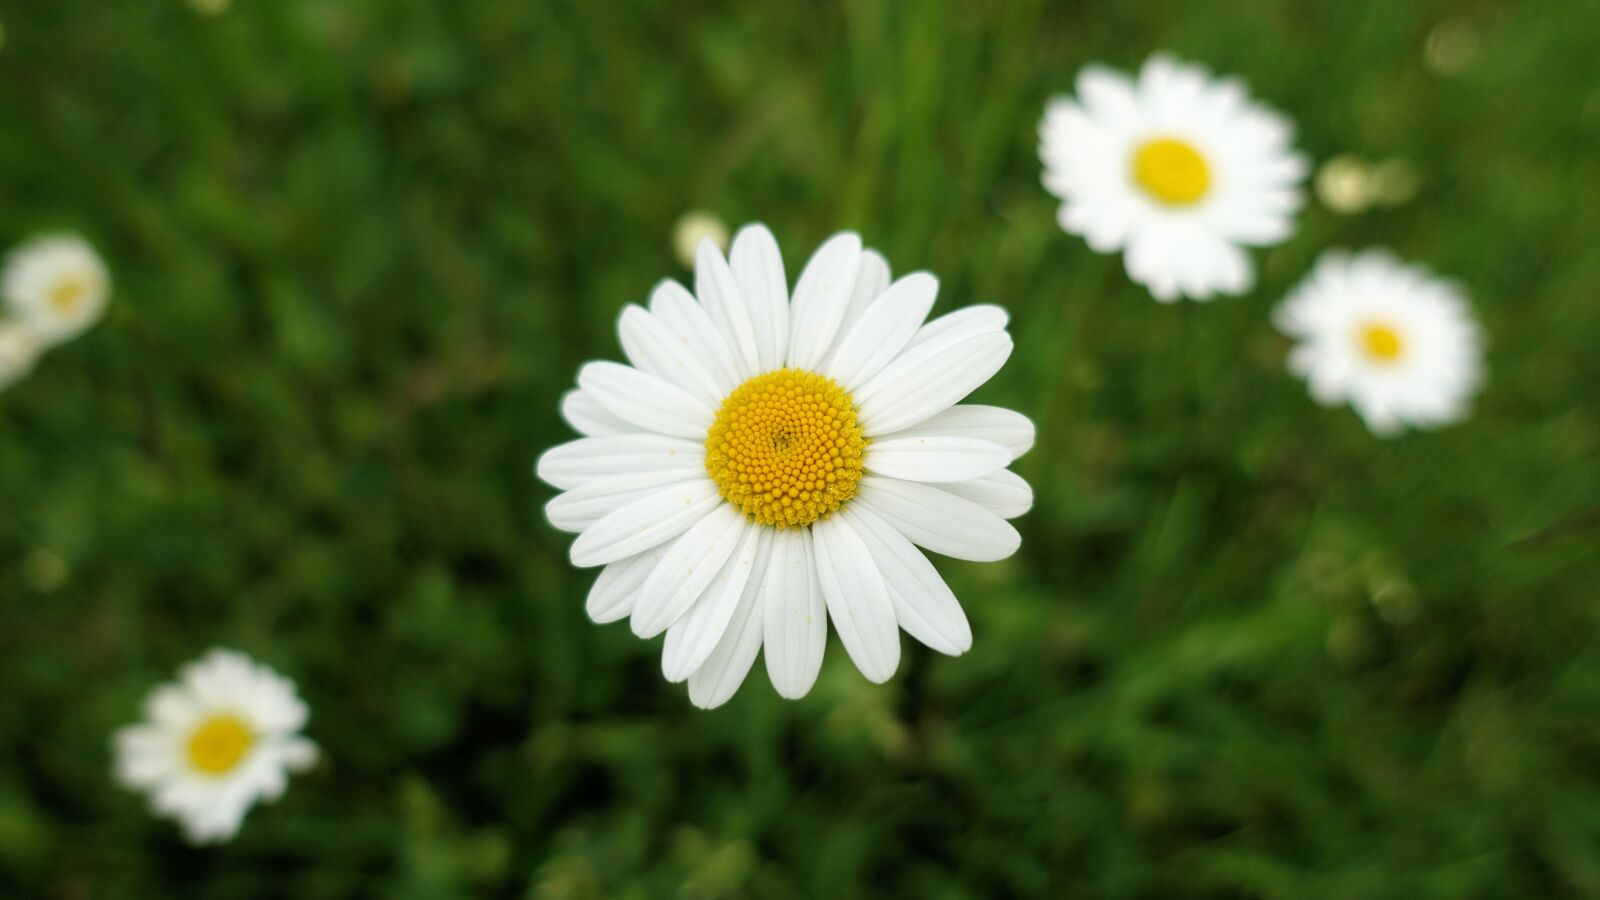 Sony Cyber-shot DSC-RX100 III sample photo. Daisy, close up, meadow photography